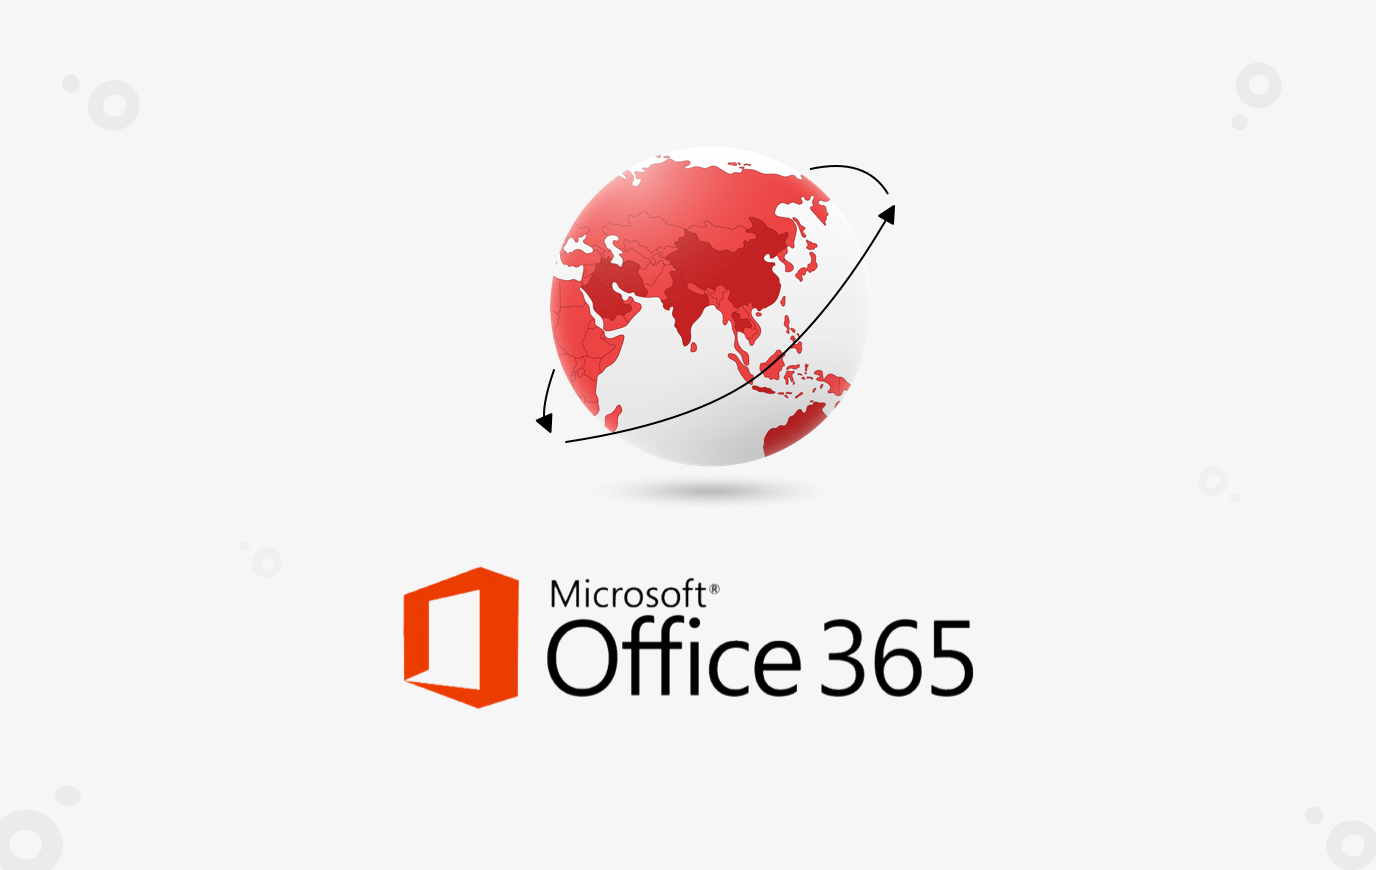 How to Communicate Better when Everyone Works Remote using Office 365 | Bitwise